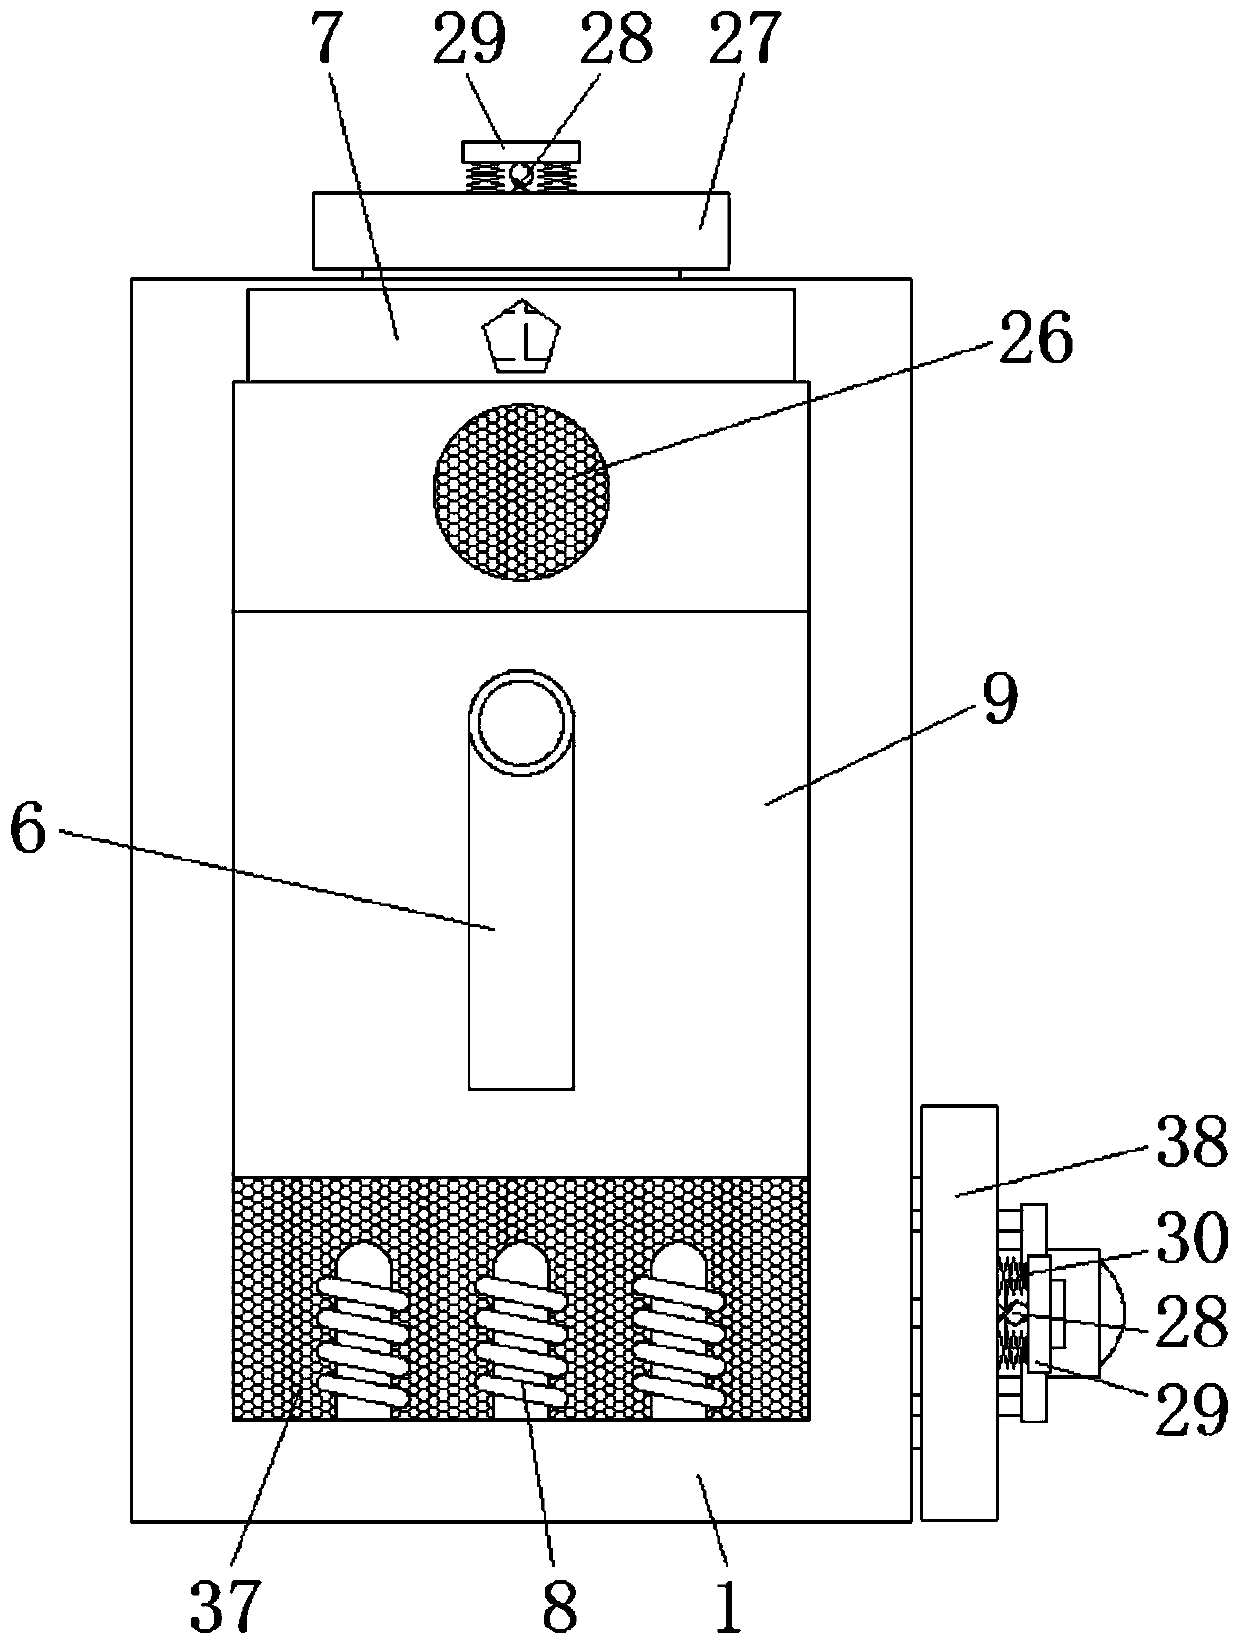 Integrated treatment device for co-treatment of industrial sewage and waste gas